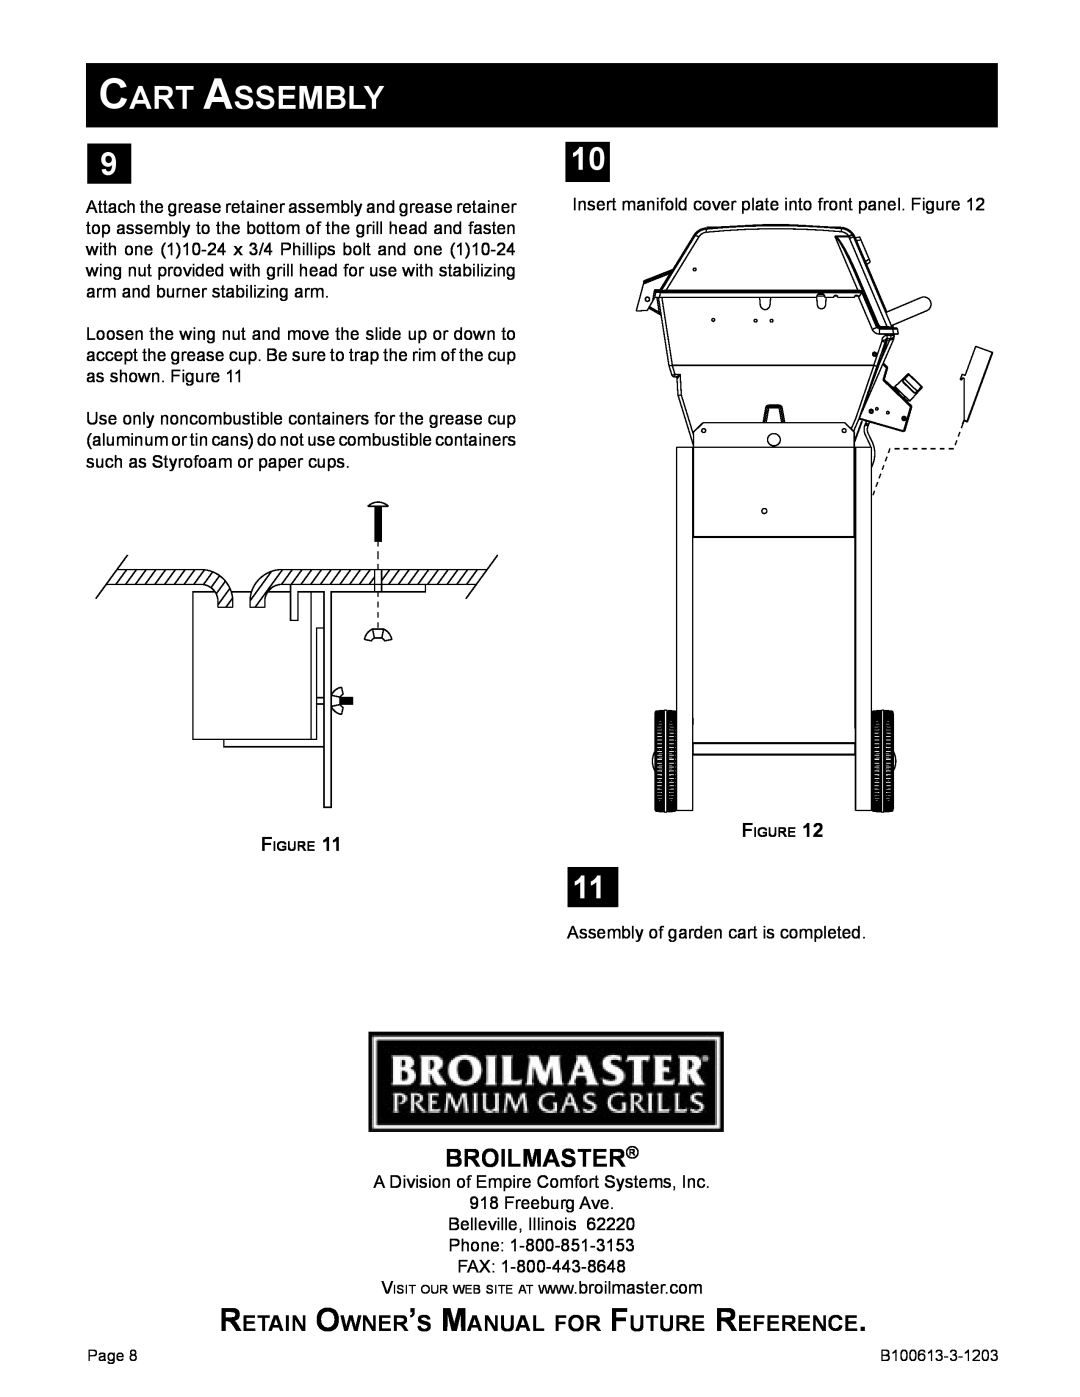 Broilmaster B100613-3-1203 owner manual Retain Owner’S Manual For Future Reference, Cart Assembly, Broilmaster 